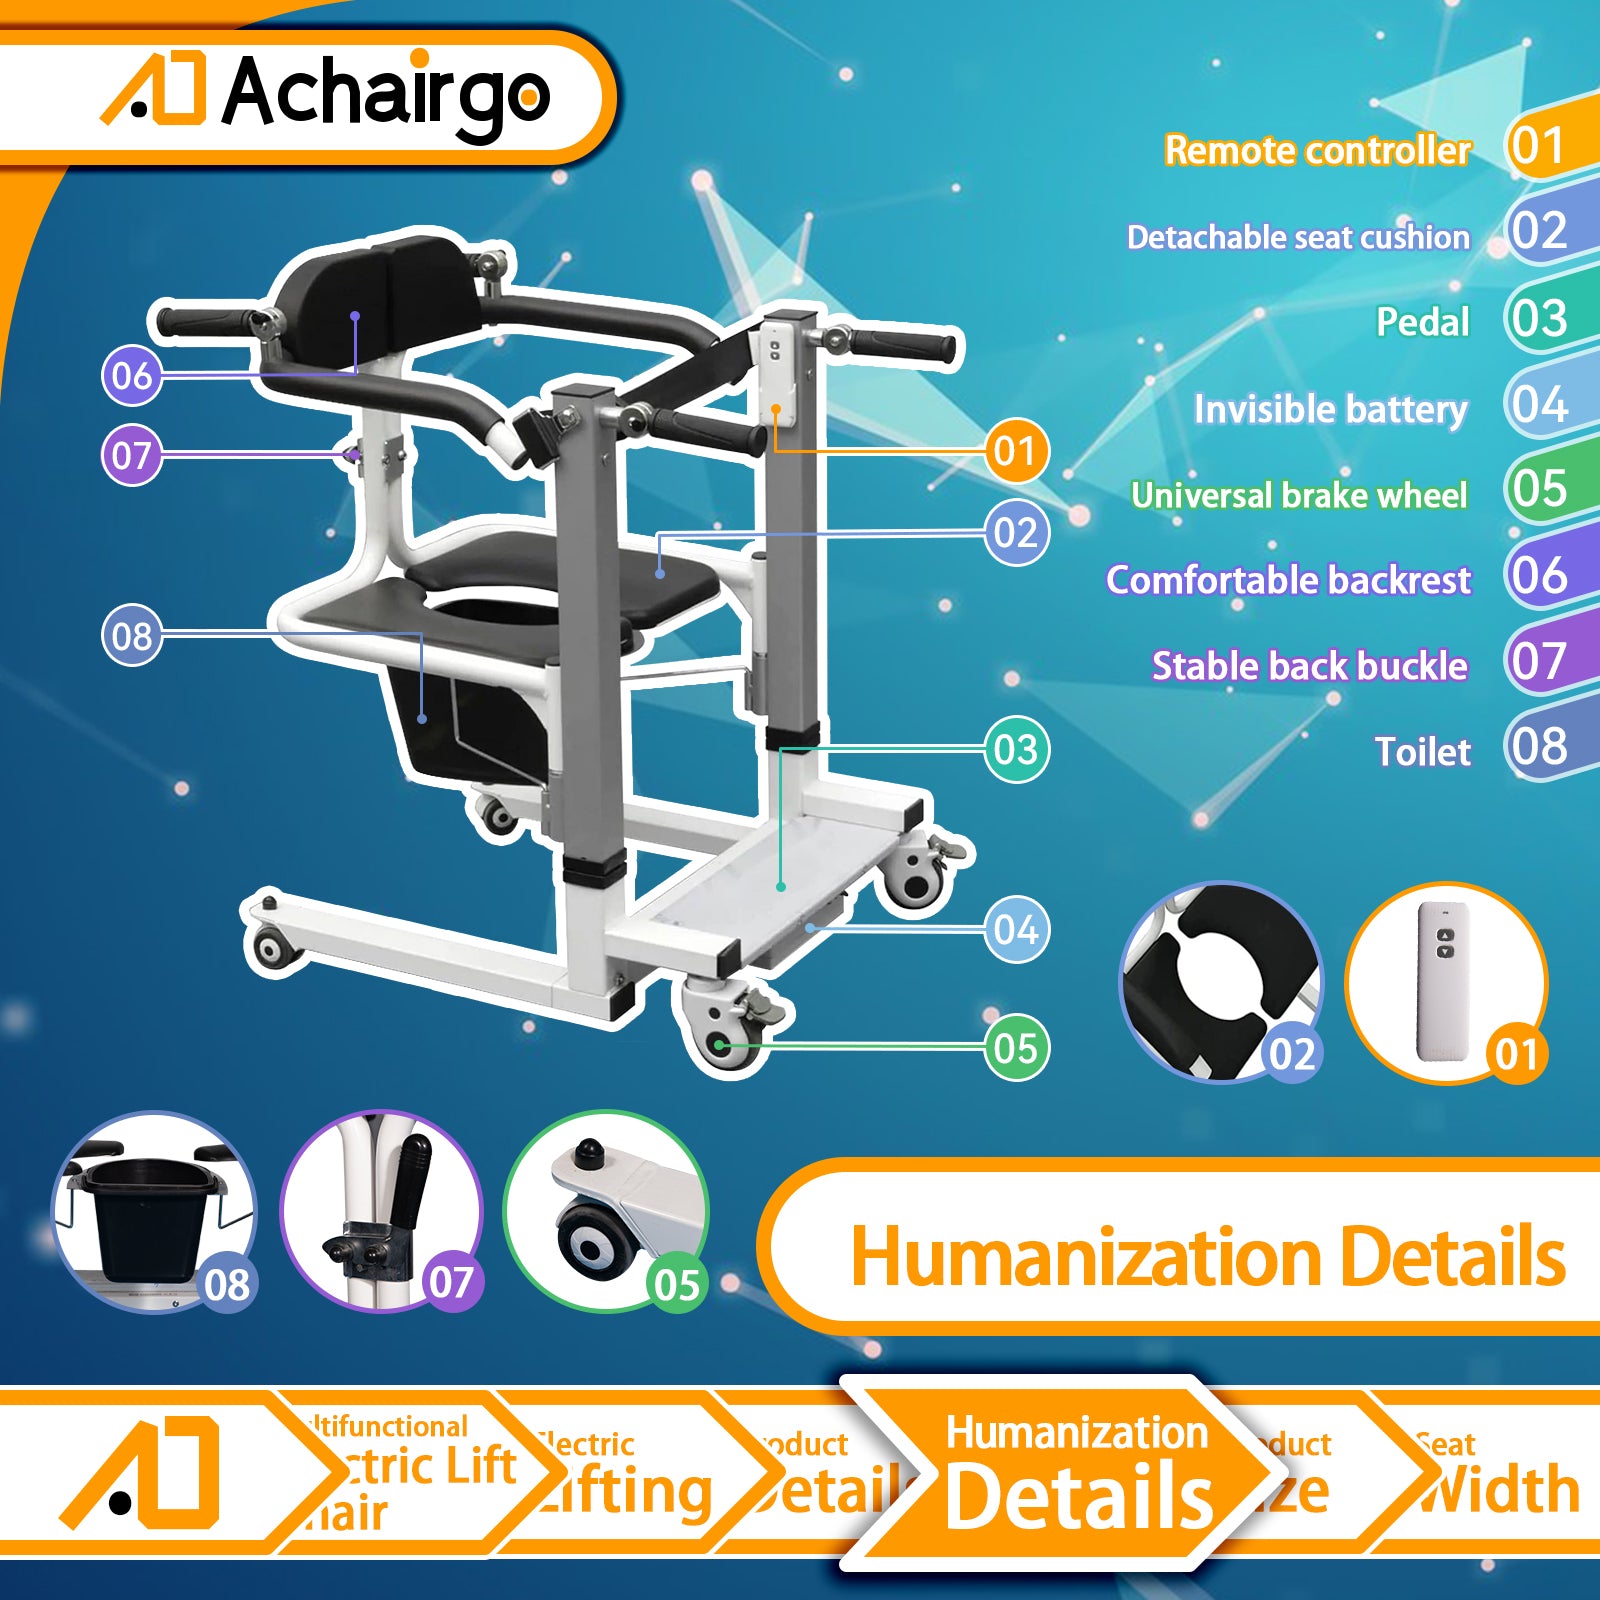 Achairgo Chair: Simplifying Patient Mobility